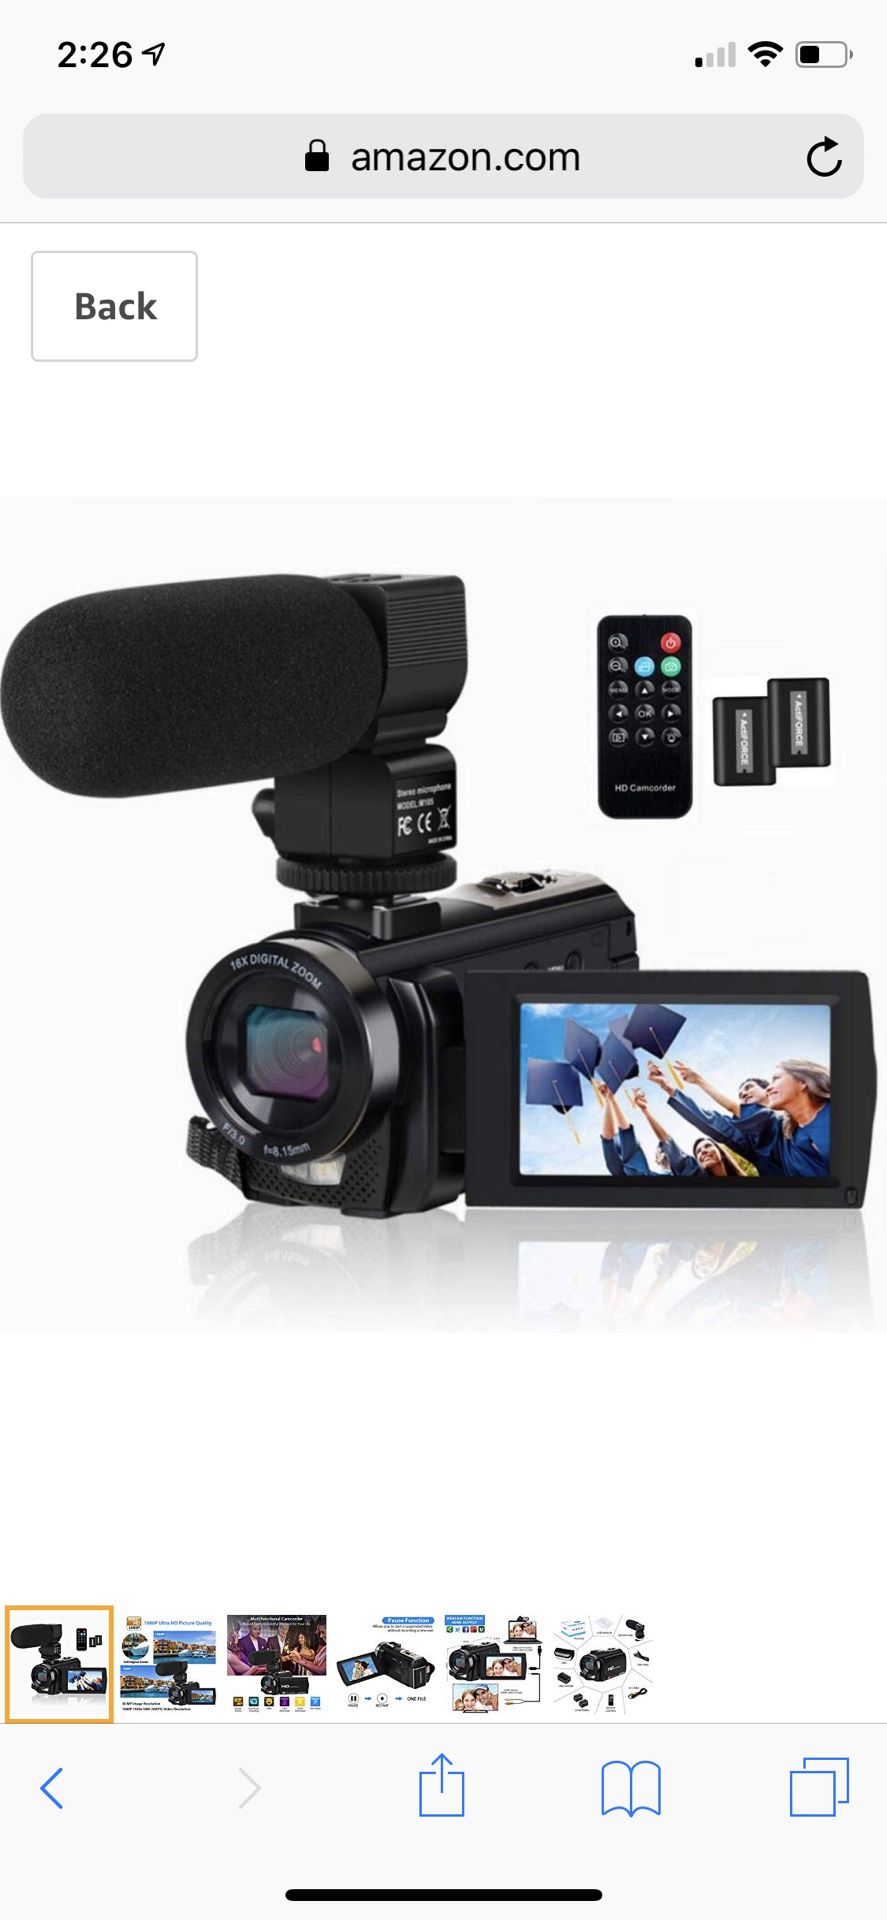 Video Camera Camcorder Digital YouTube Vlogging Camera Recorder FHD 1080P 24.0MP 3.0 Inch 270 Degree Rotation Screen 16X Digital Zoom Camcorder with